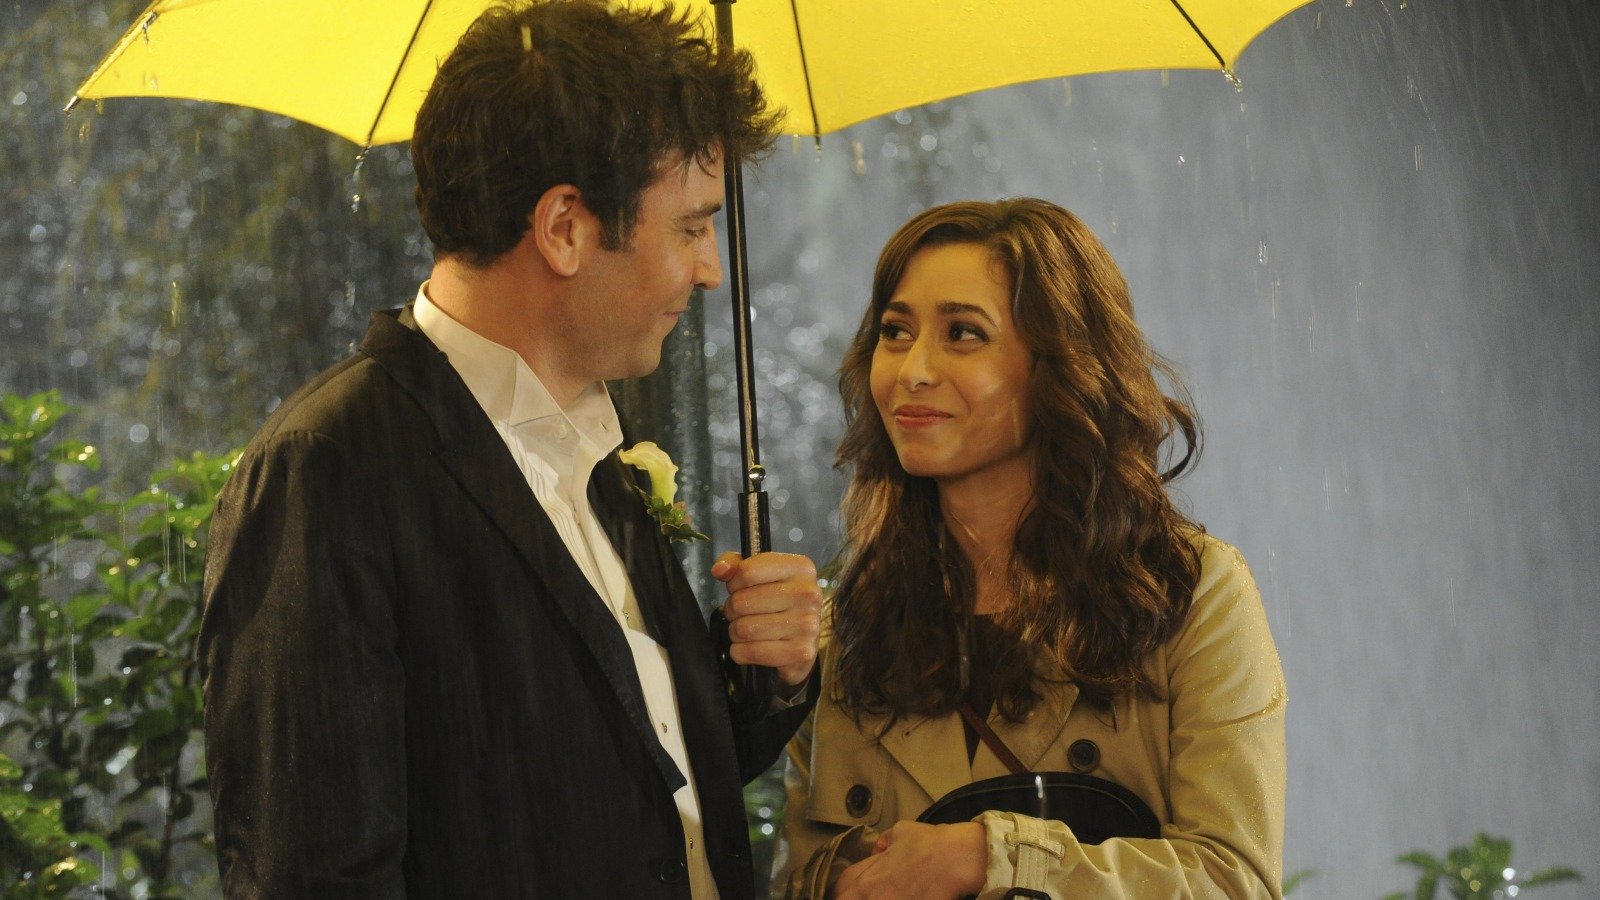 How I Met Your Mother Character Endings Ranked Worst To Best